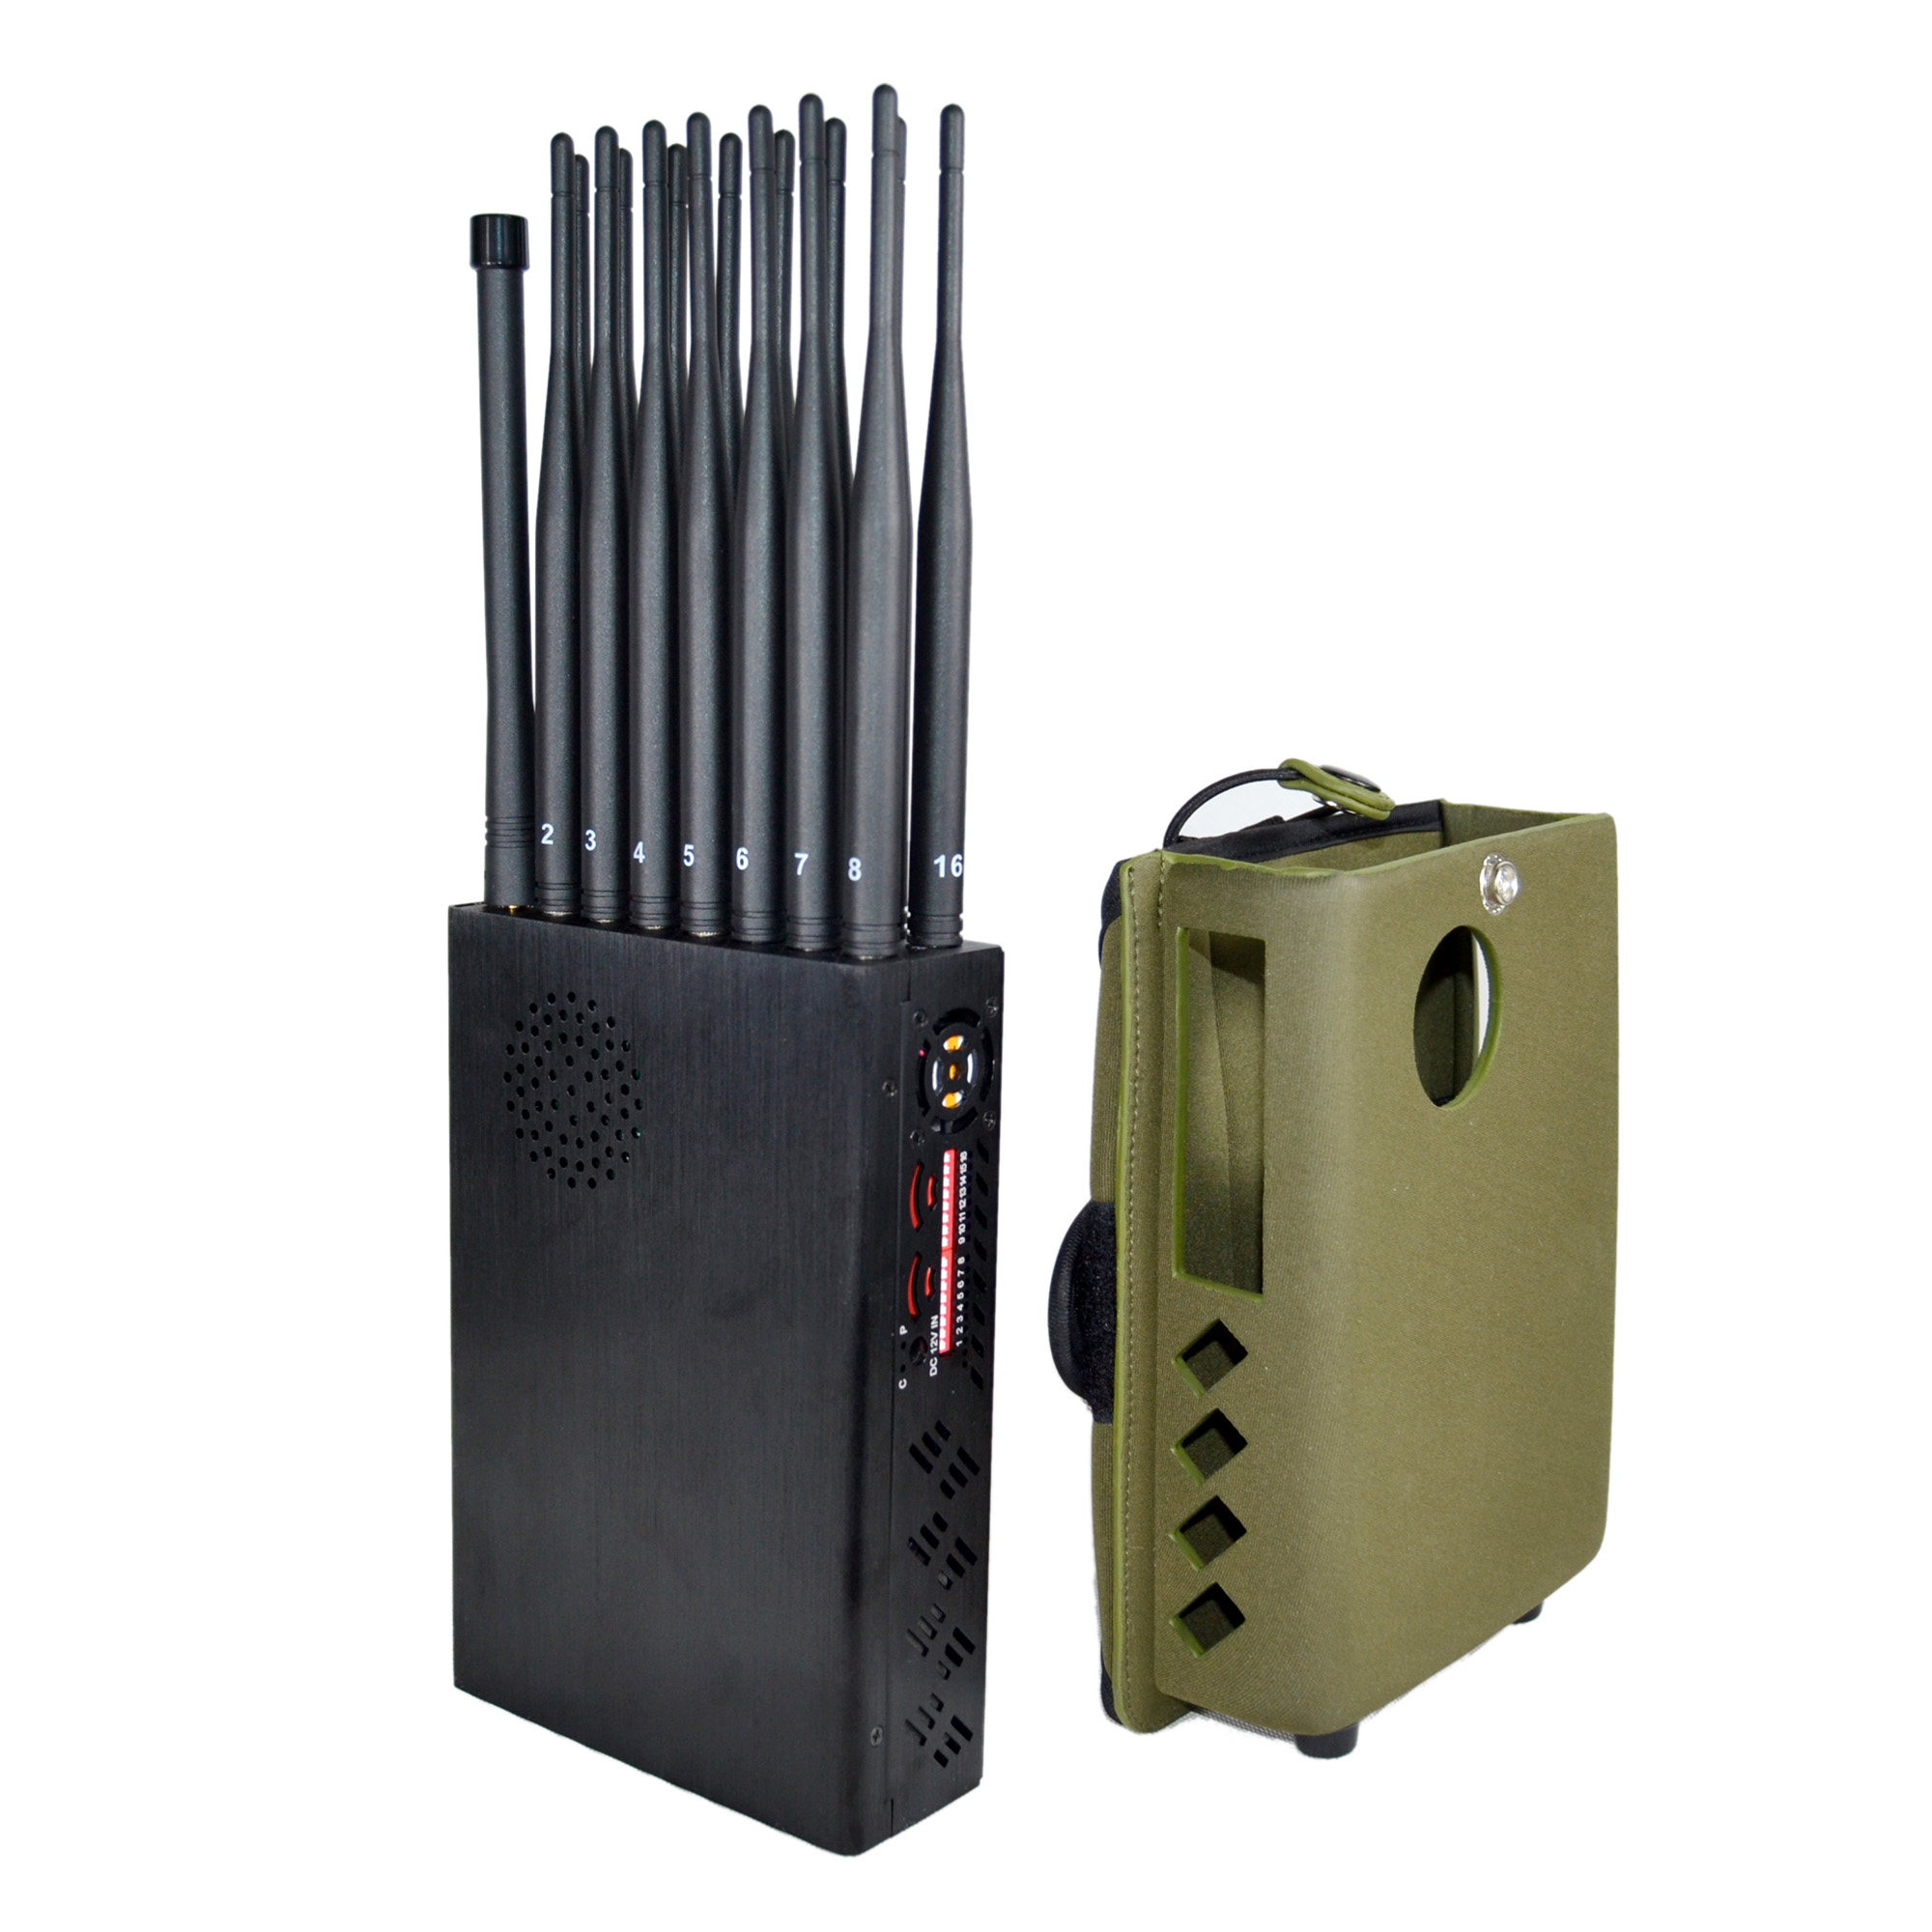 2020 16 Watt New Handheld 16 Bands Cell Phone Signal Jammer With Nylon Cover,Blocking 5G 4G Wi ...